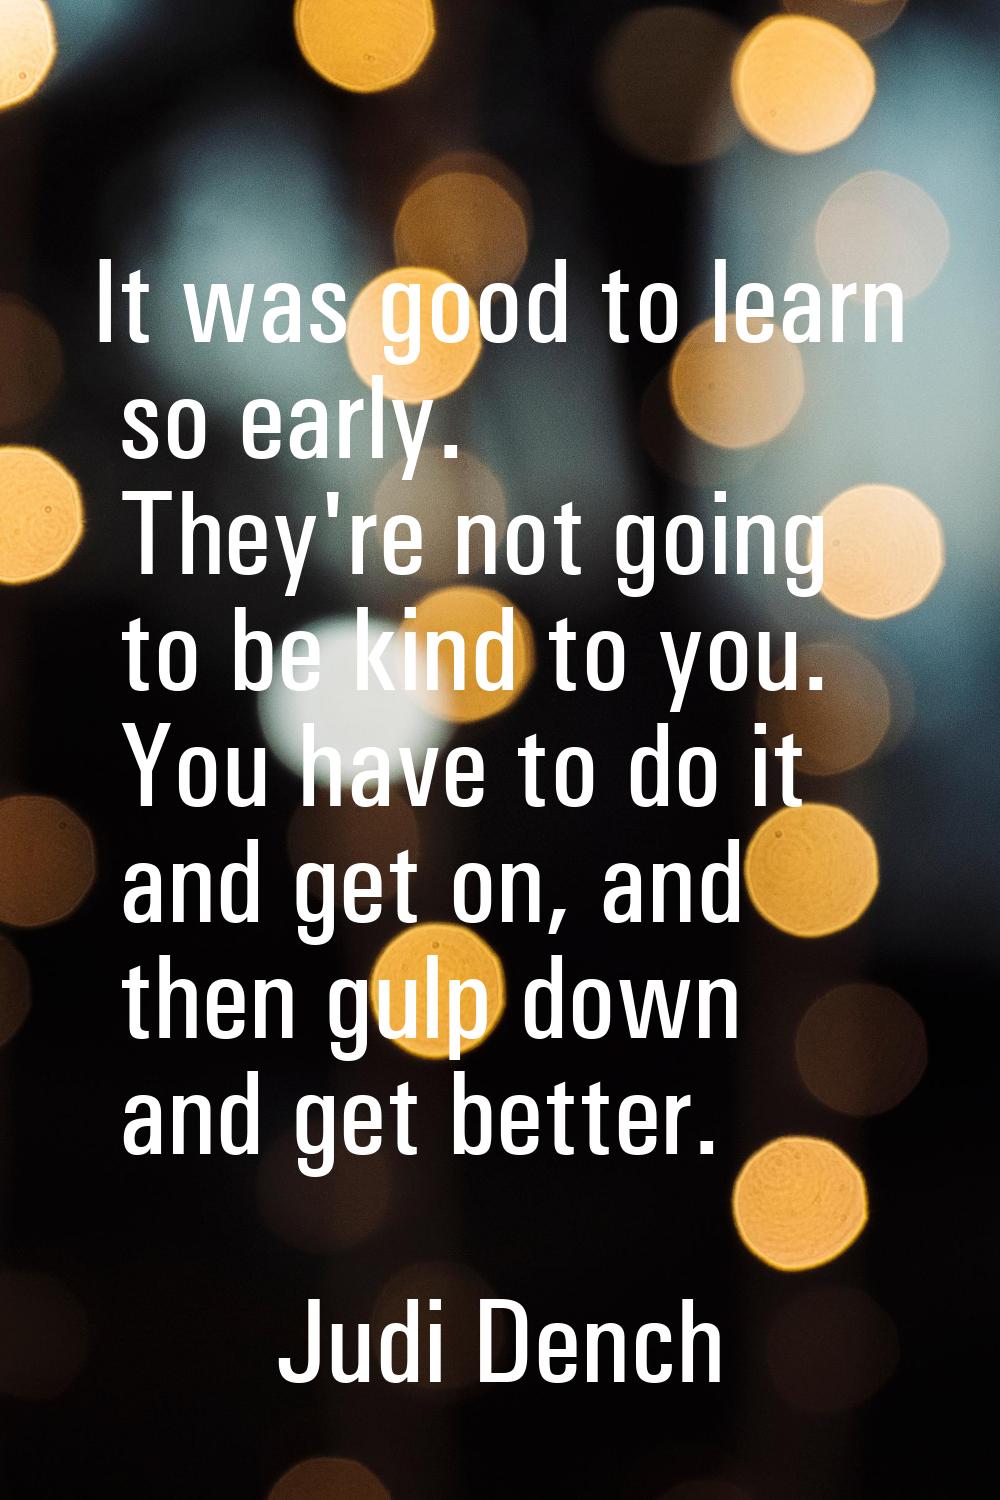 It was good to learn so early. They're not going to be kind to you. You have to do it and get on, a